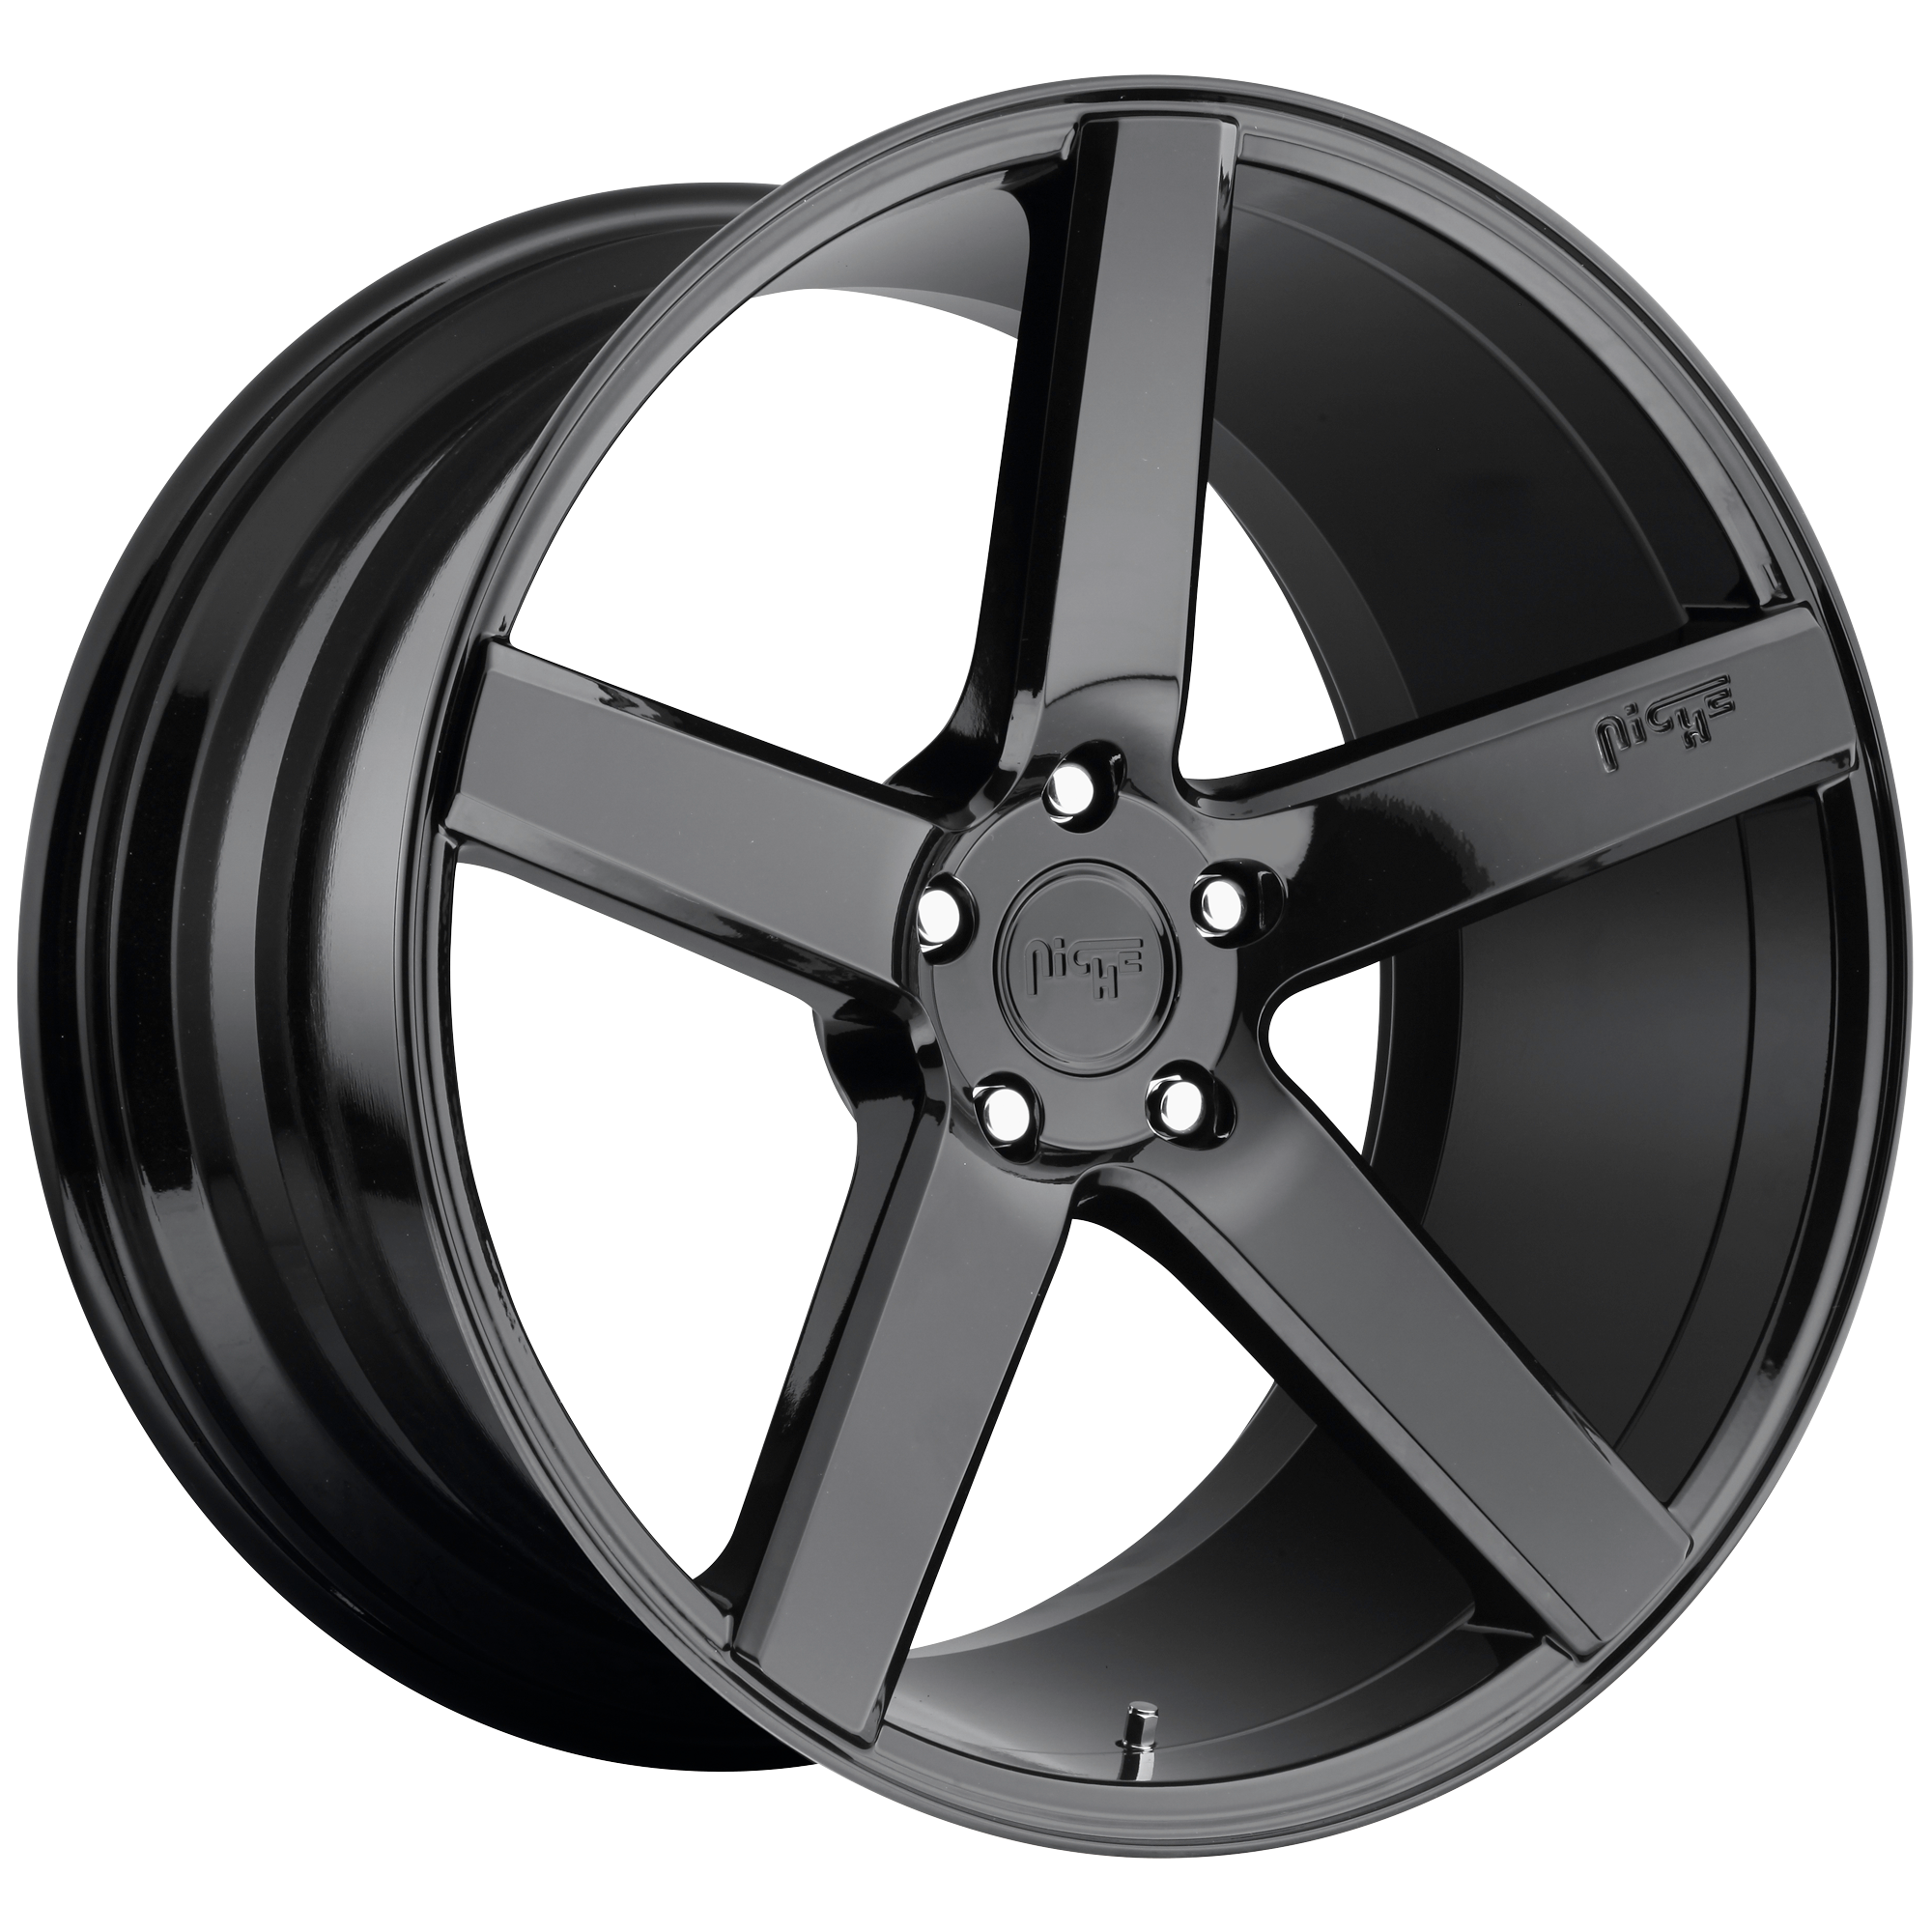 MILAN 20x10 5x114.30 GLOSS BLACK (40 mm) - Tires and Engine Performance